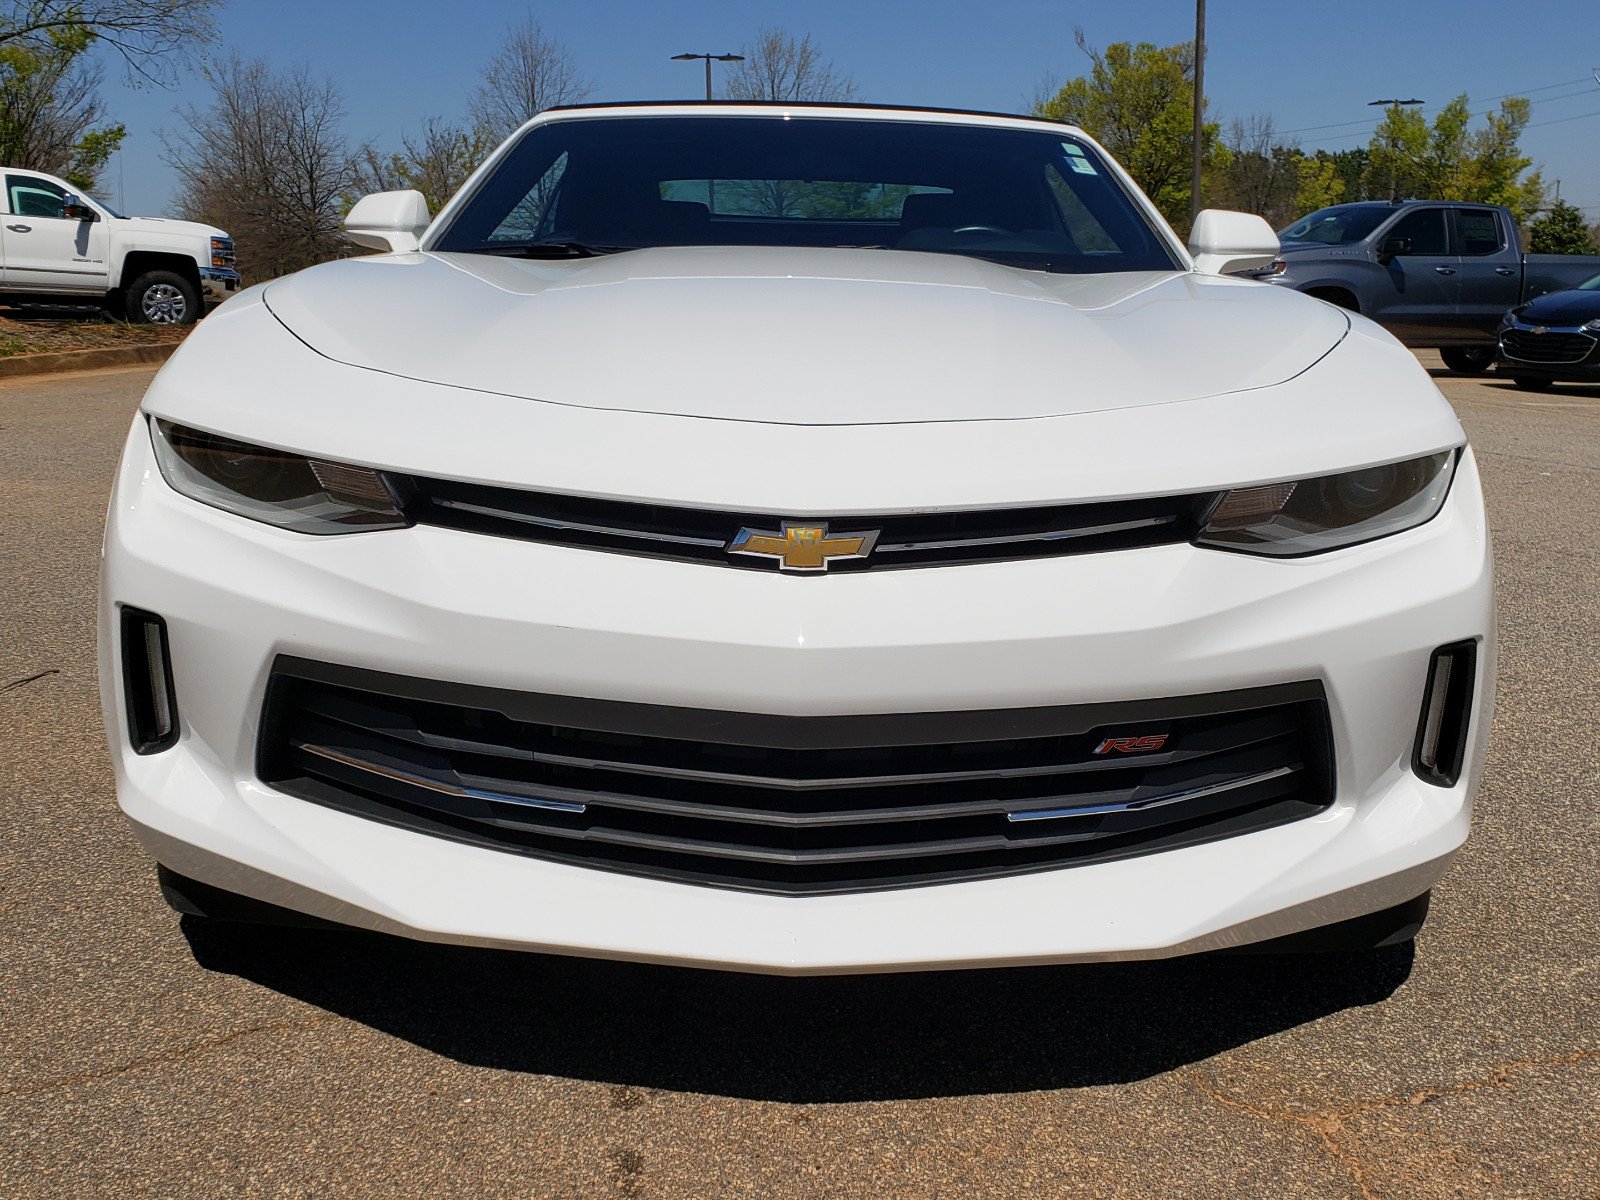 Pre-Owned 2017 Chevrolet Camaro LT Convertible in Roswell #1180909A